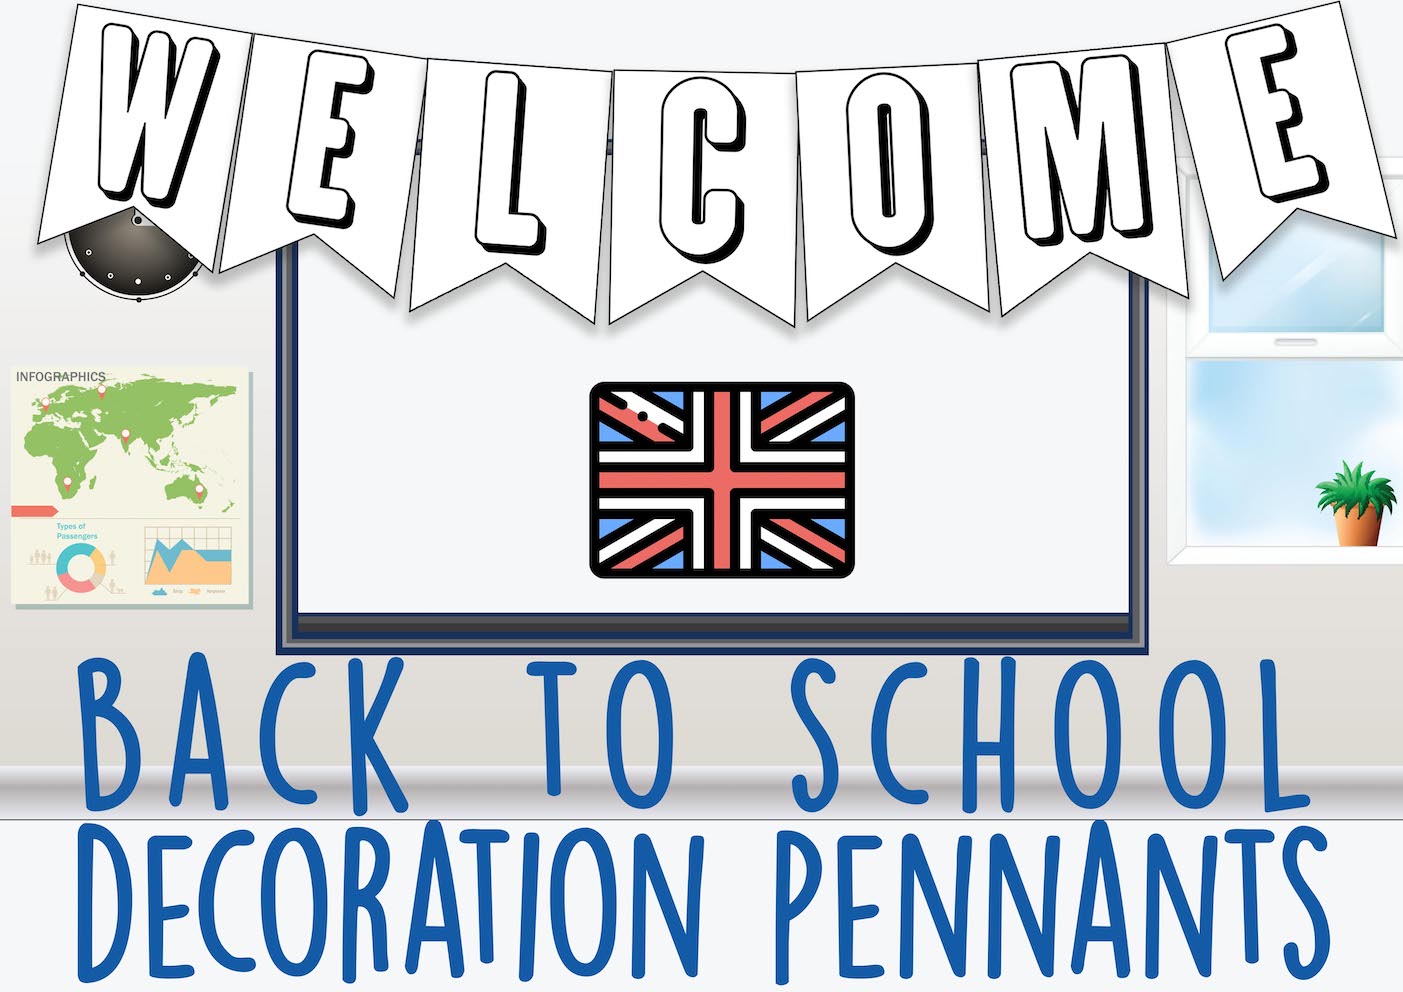 Back to school pennants decoration